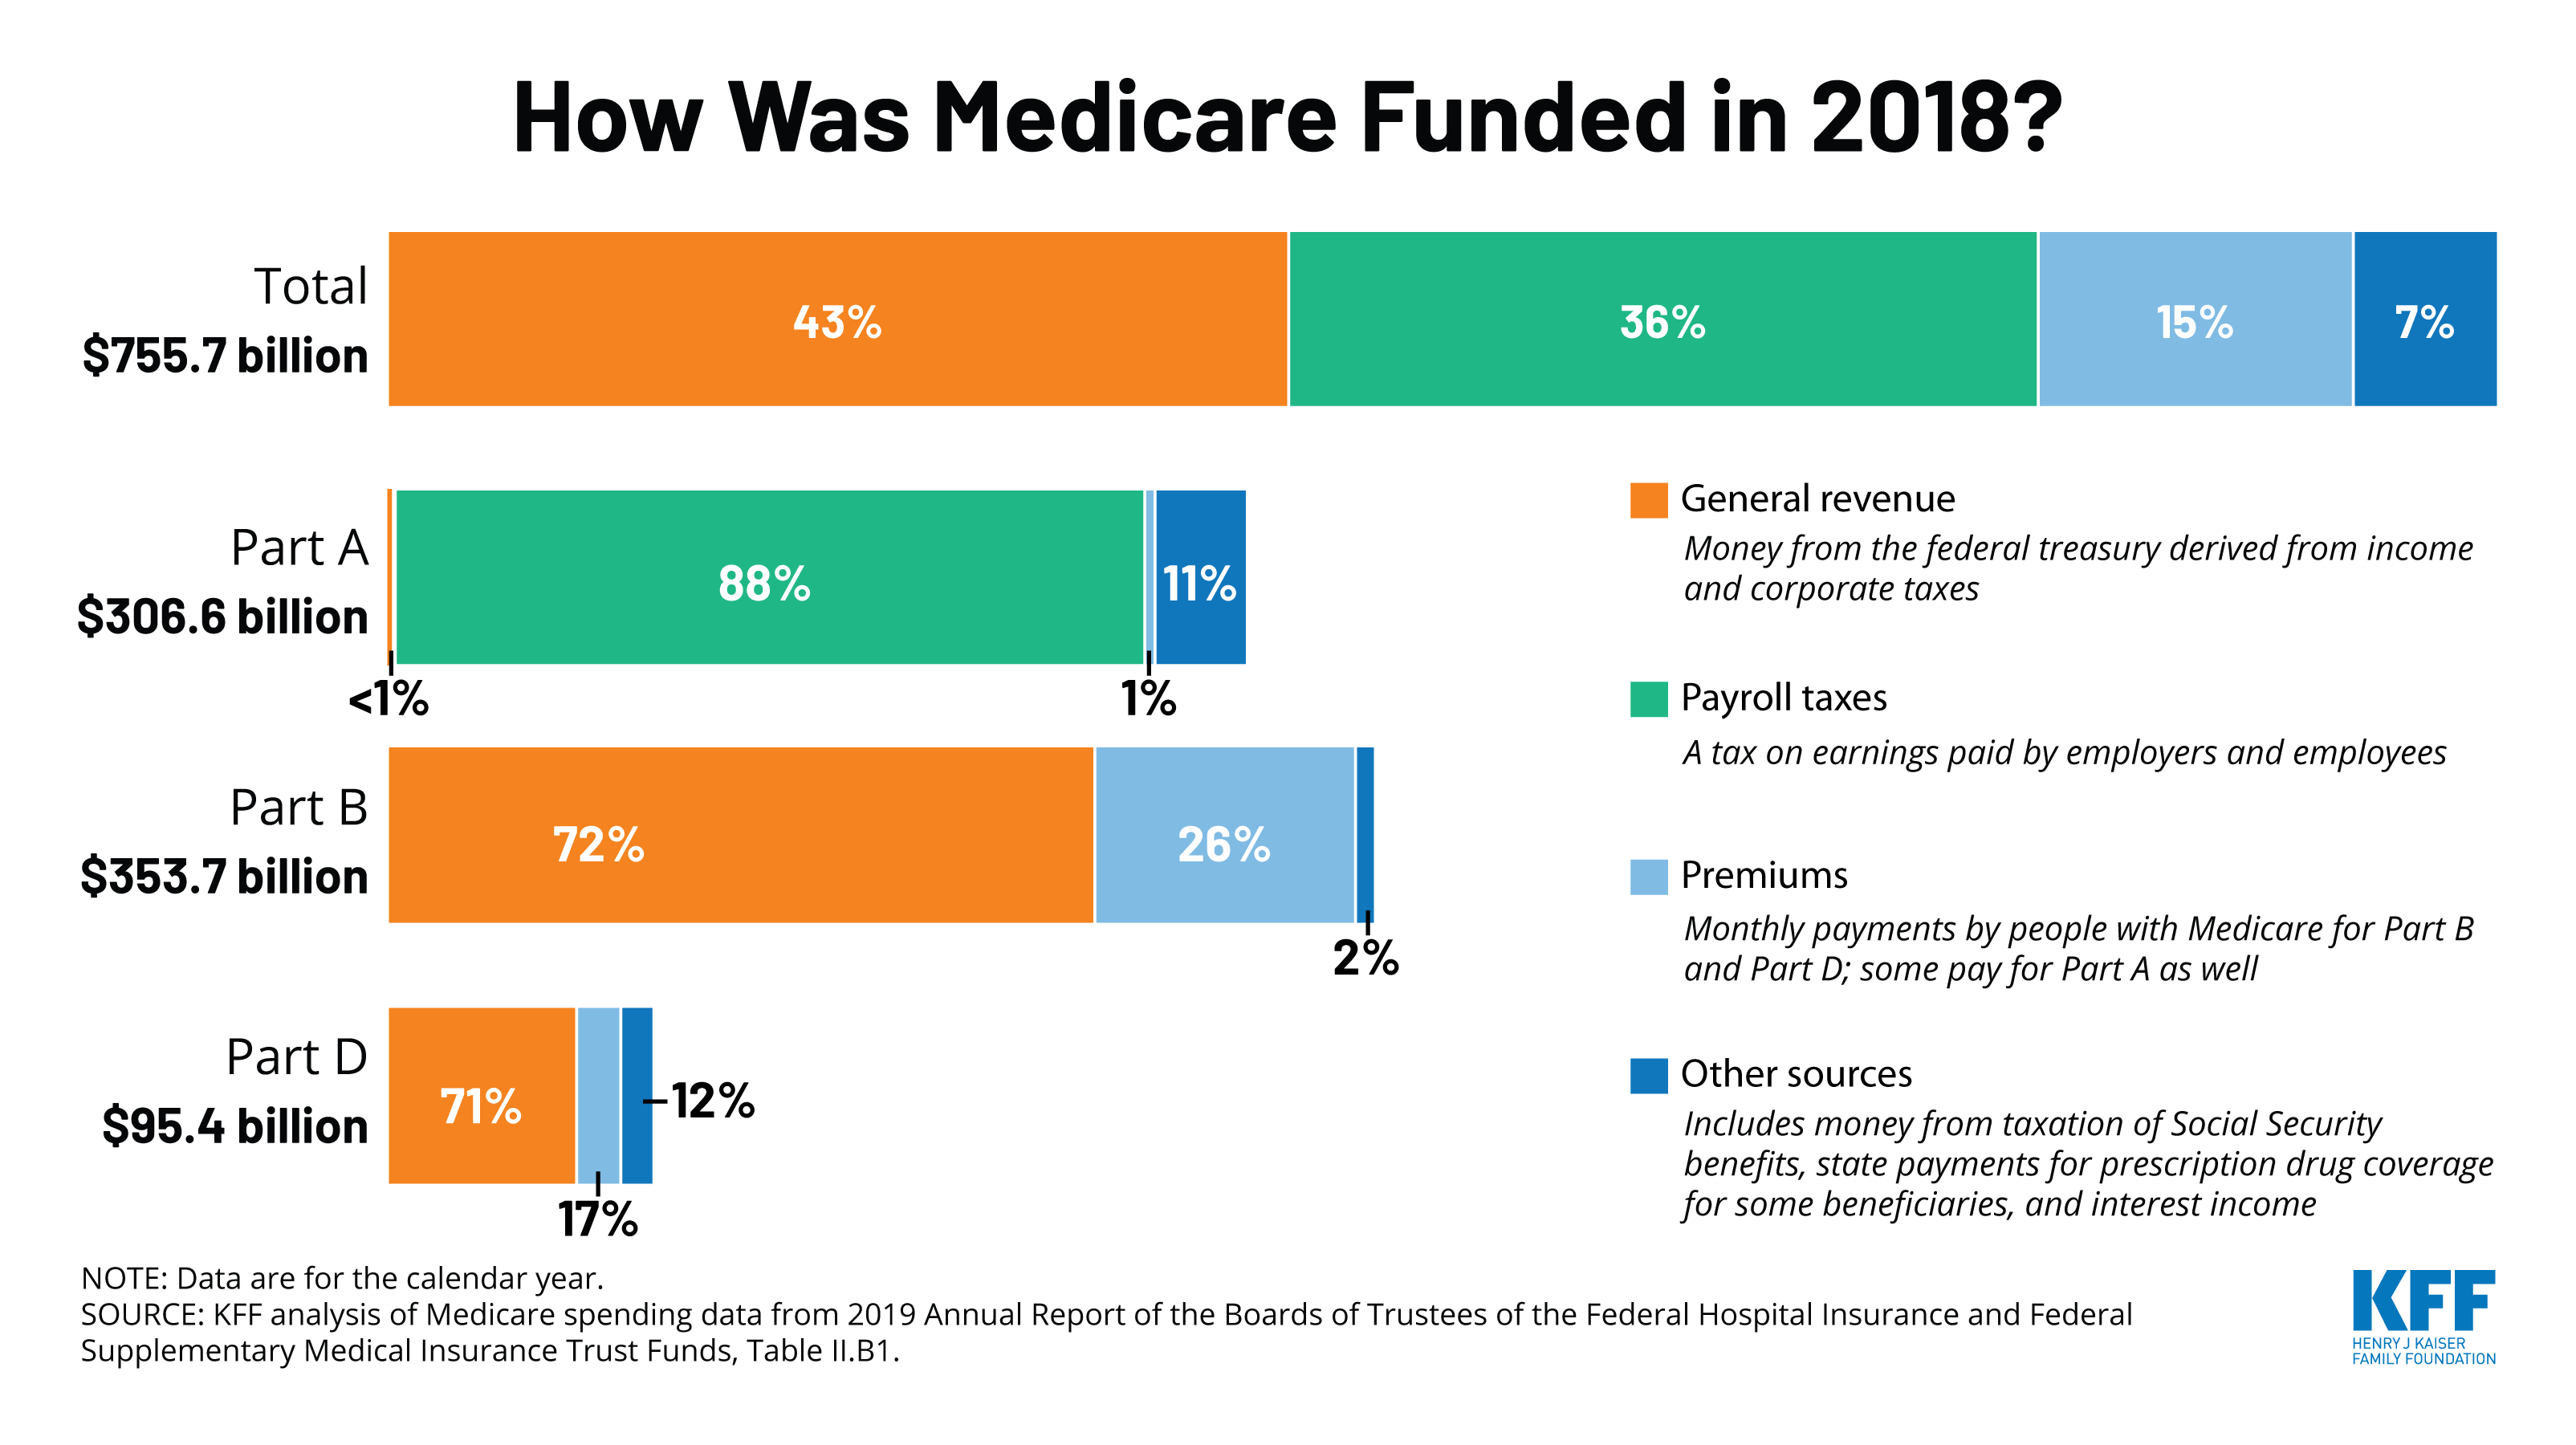 How Was Medicare Funded in 2018?